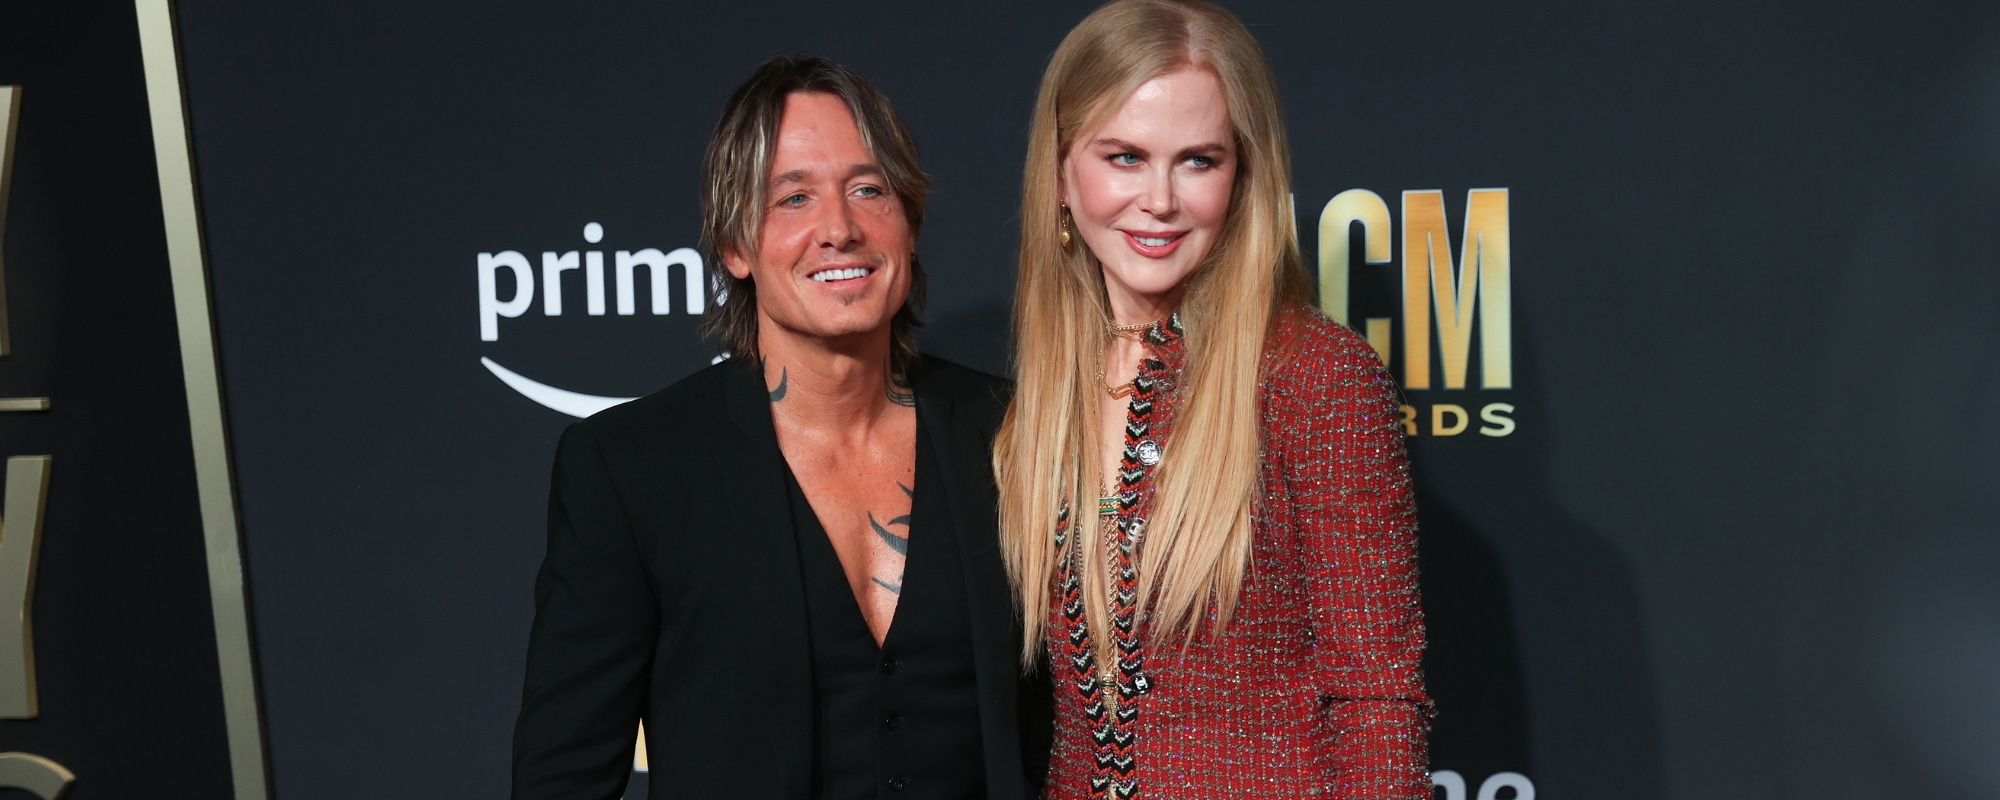 Keith Urban Reveals Nicole Kidman is Shocked by AMC Ad Going Viral